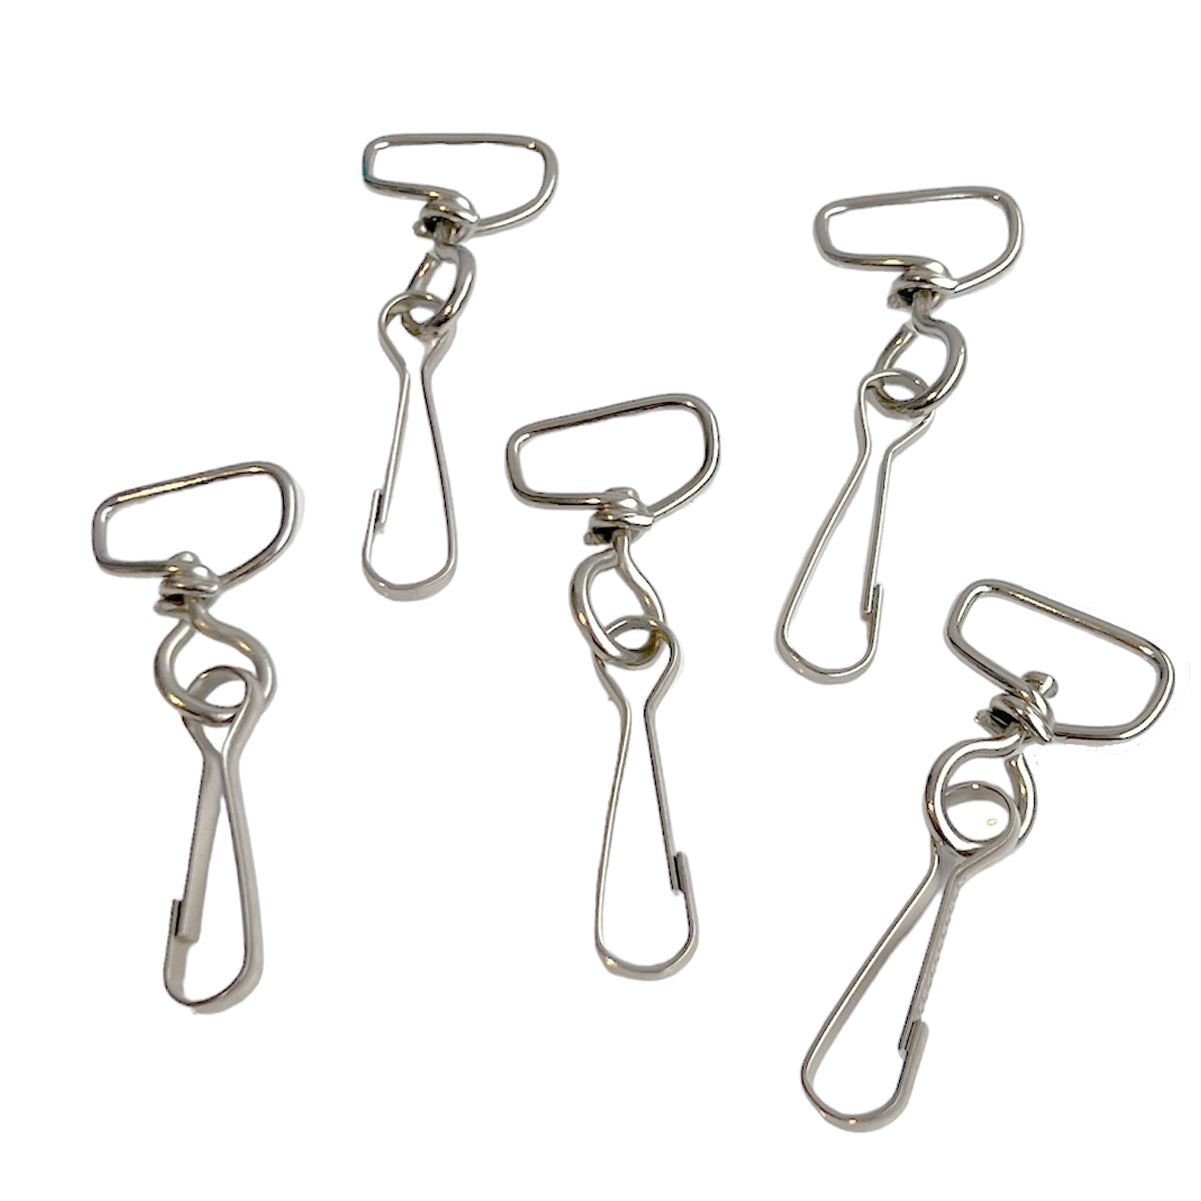 Five Premium Swivel J Clip Clasps with Wide, Smooth Rounded 3/4 Inch D Ring - DIY Lanyard and Craft Accessories (6905-M-289) are arranged on a white background.